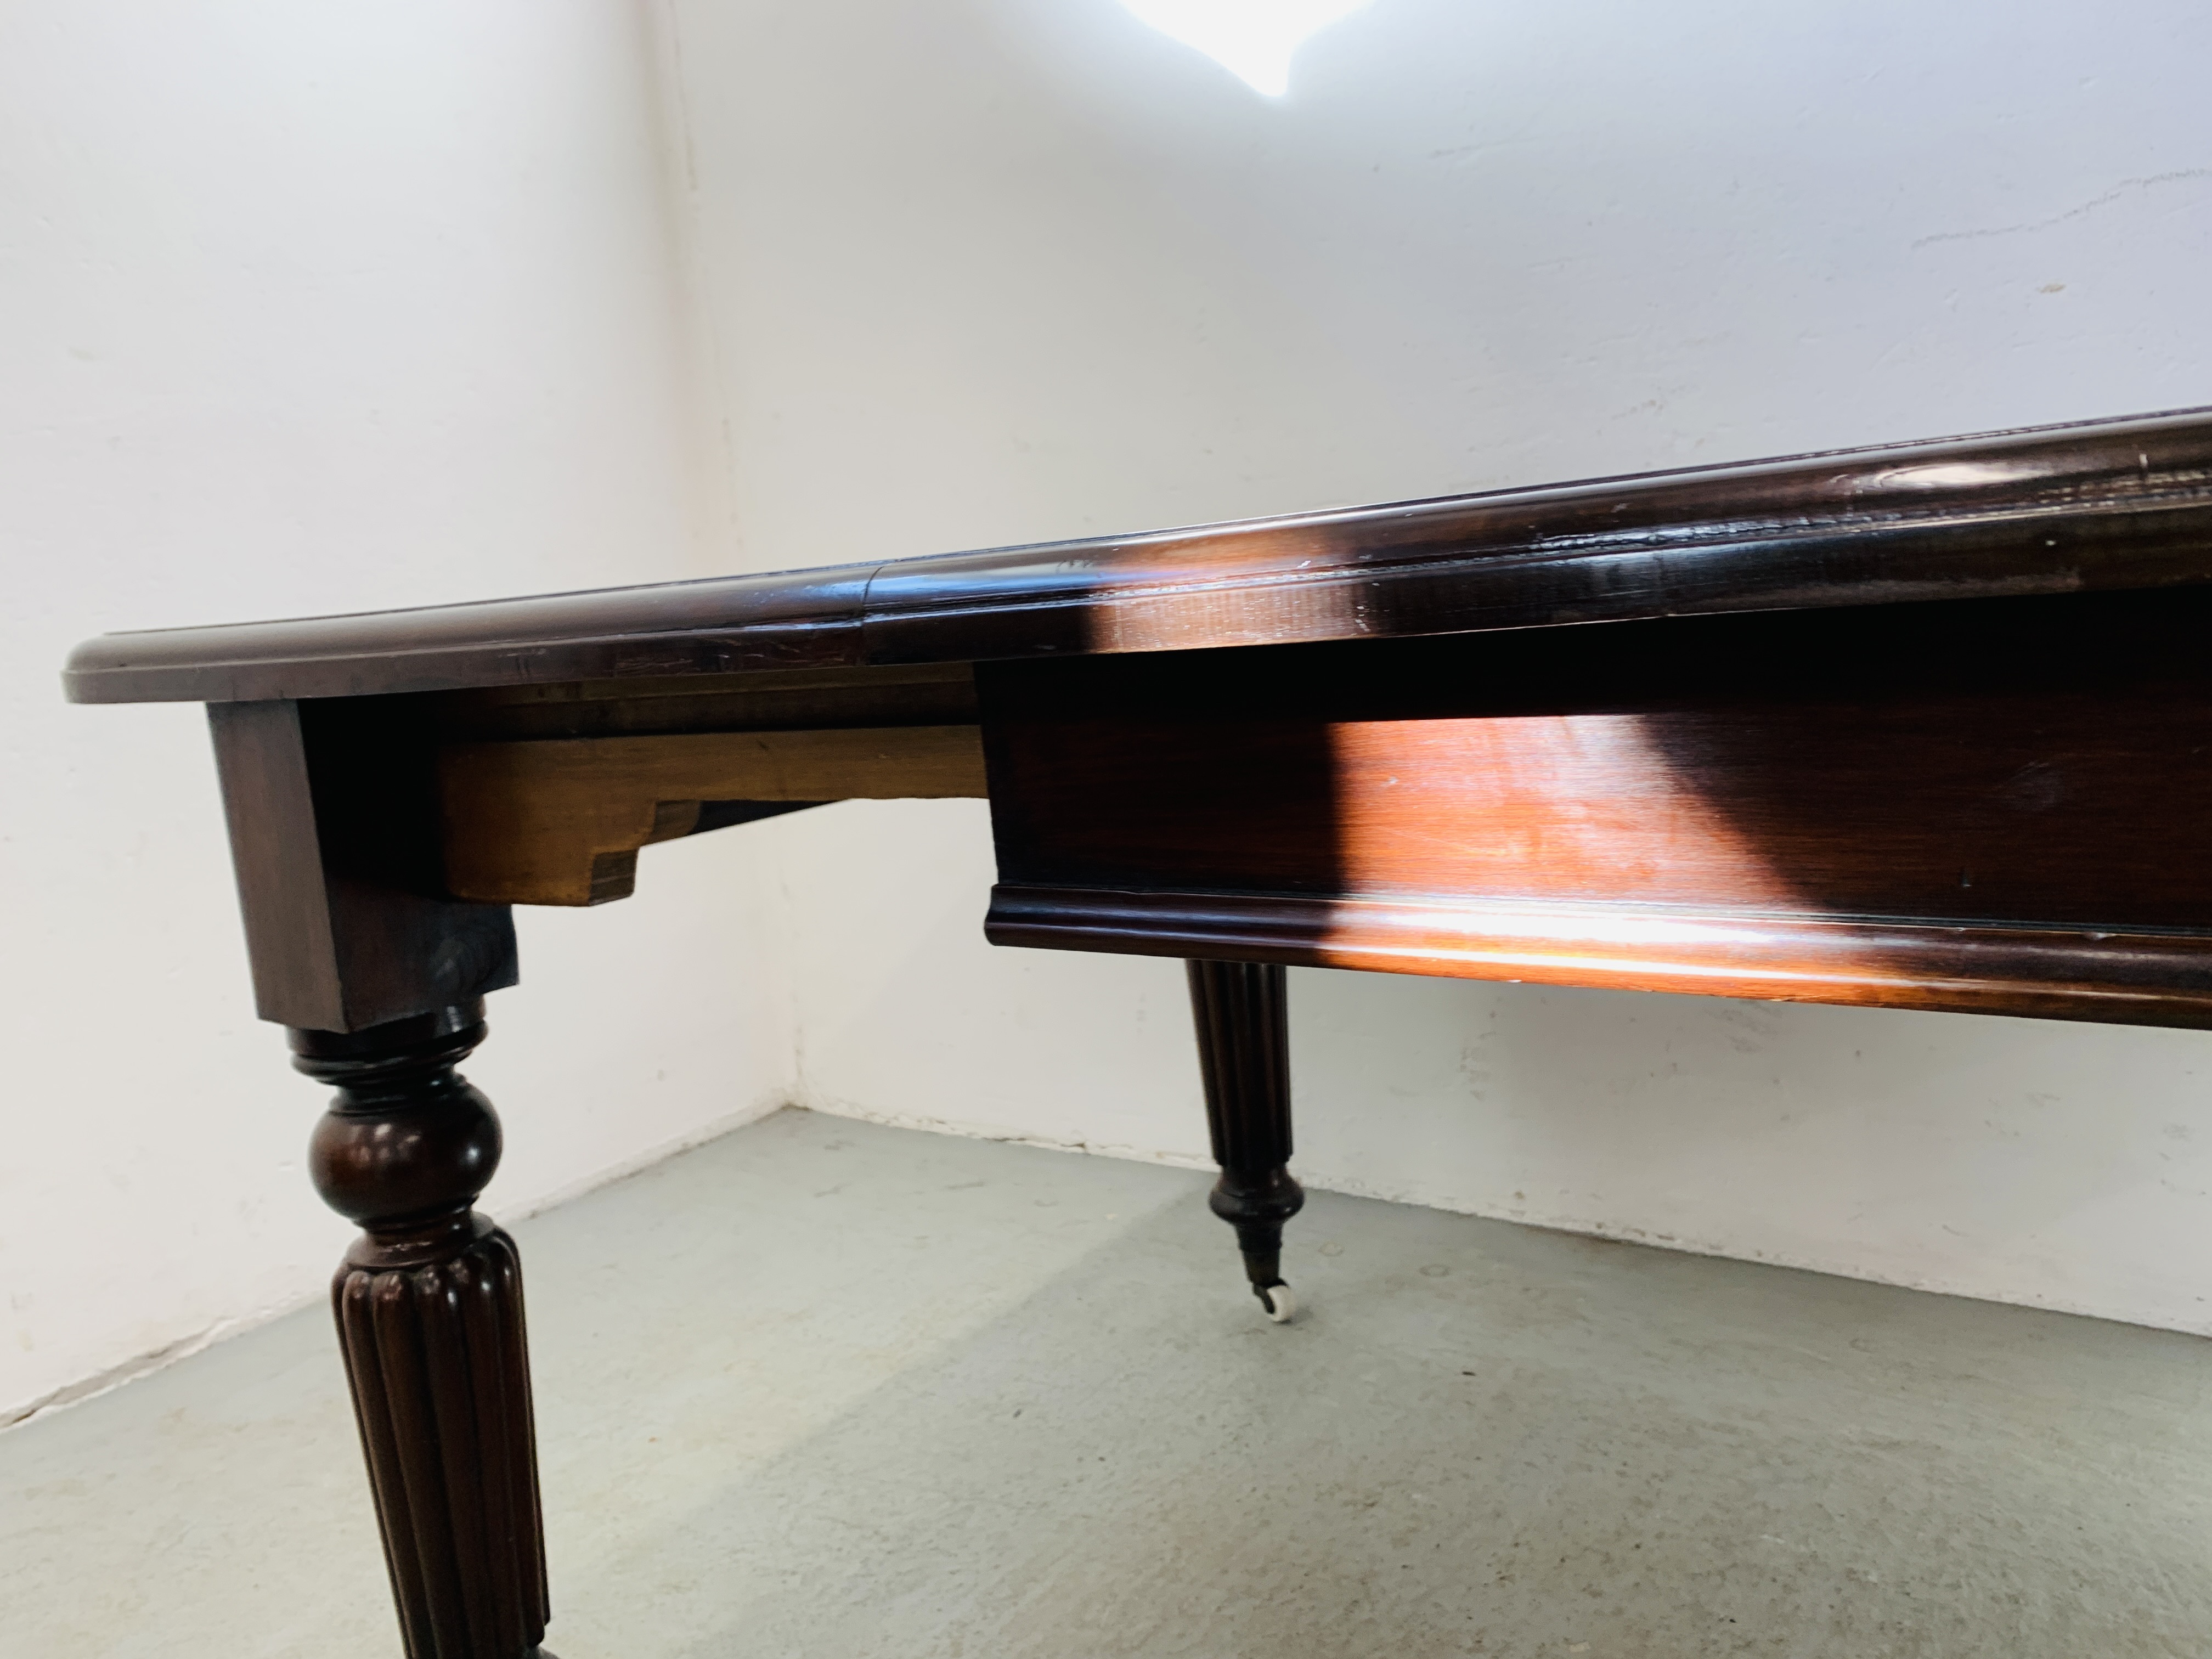 VICTORIAN MAHOGANY EXTENDING DINING TABLE, ON REEDED LEGS AND CERAMIC CASTORS (H 72CM, W 153CM, - Image 7 of 7